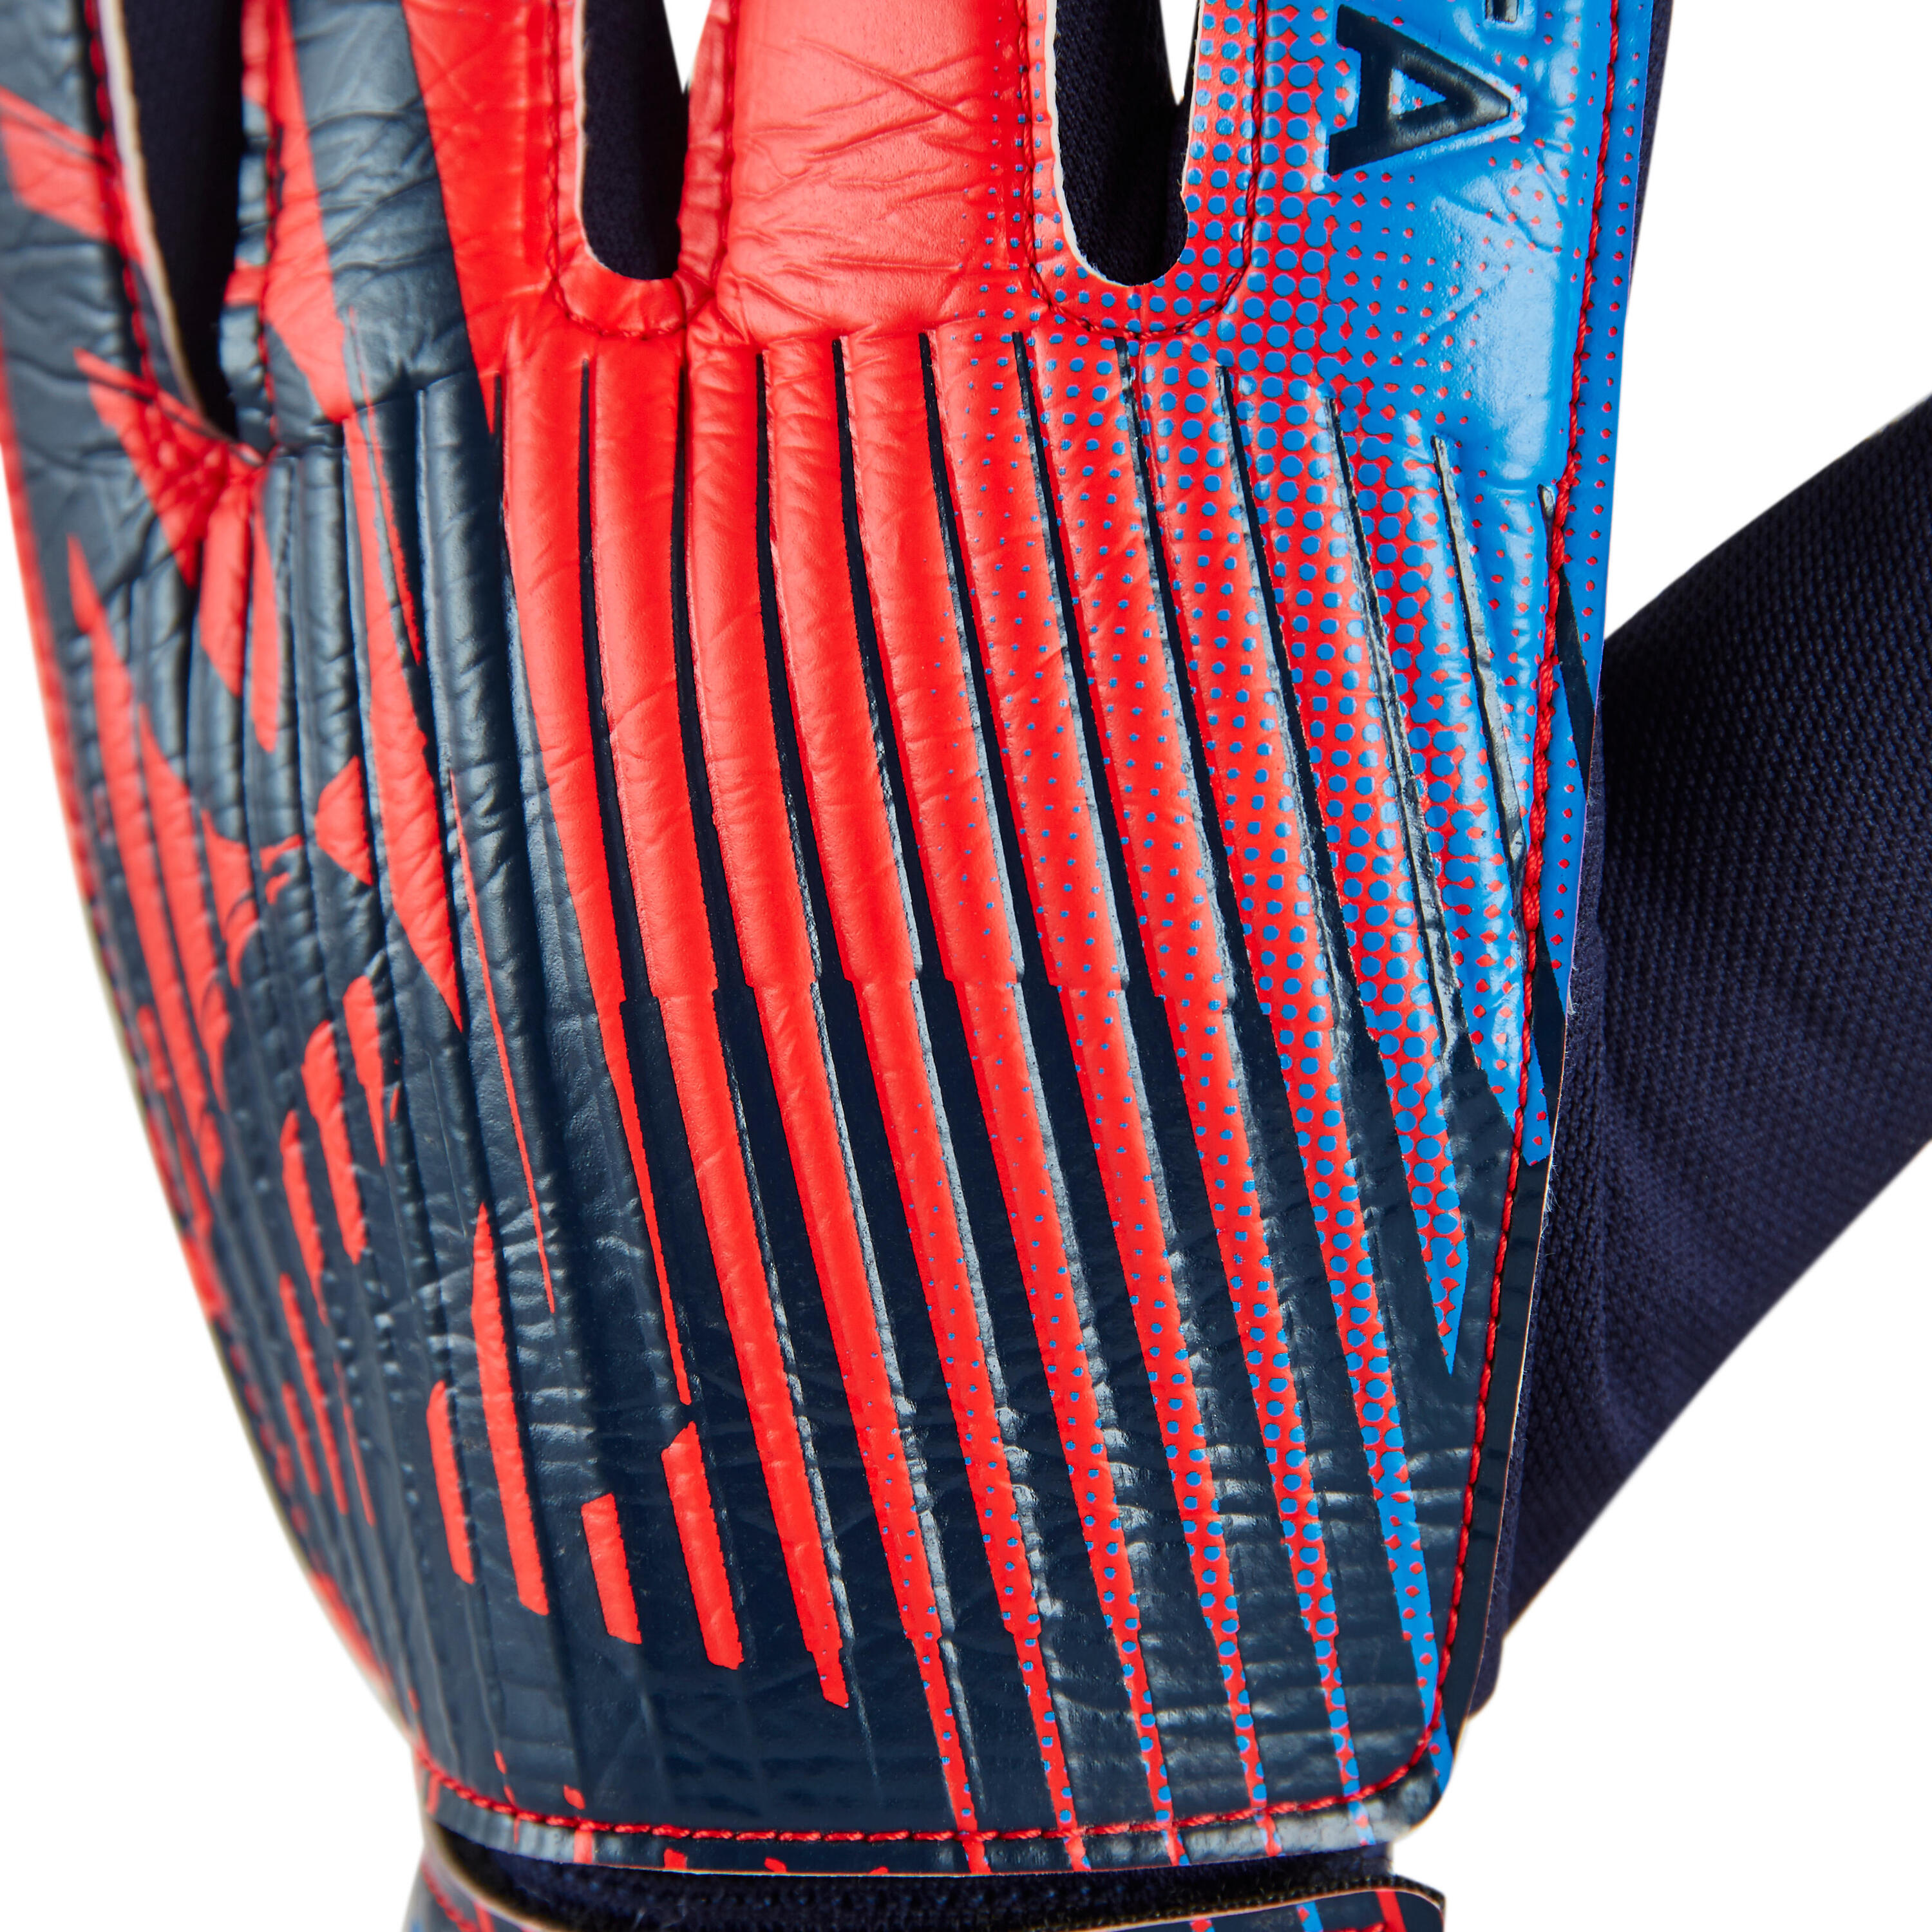 Kids' durable football gloves, red 5/6